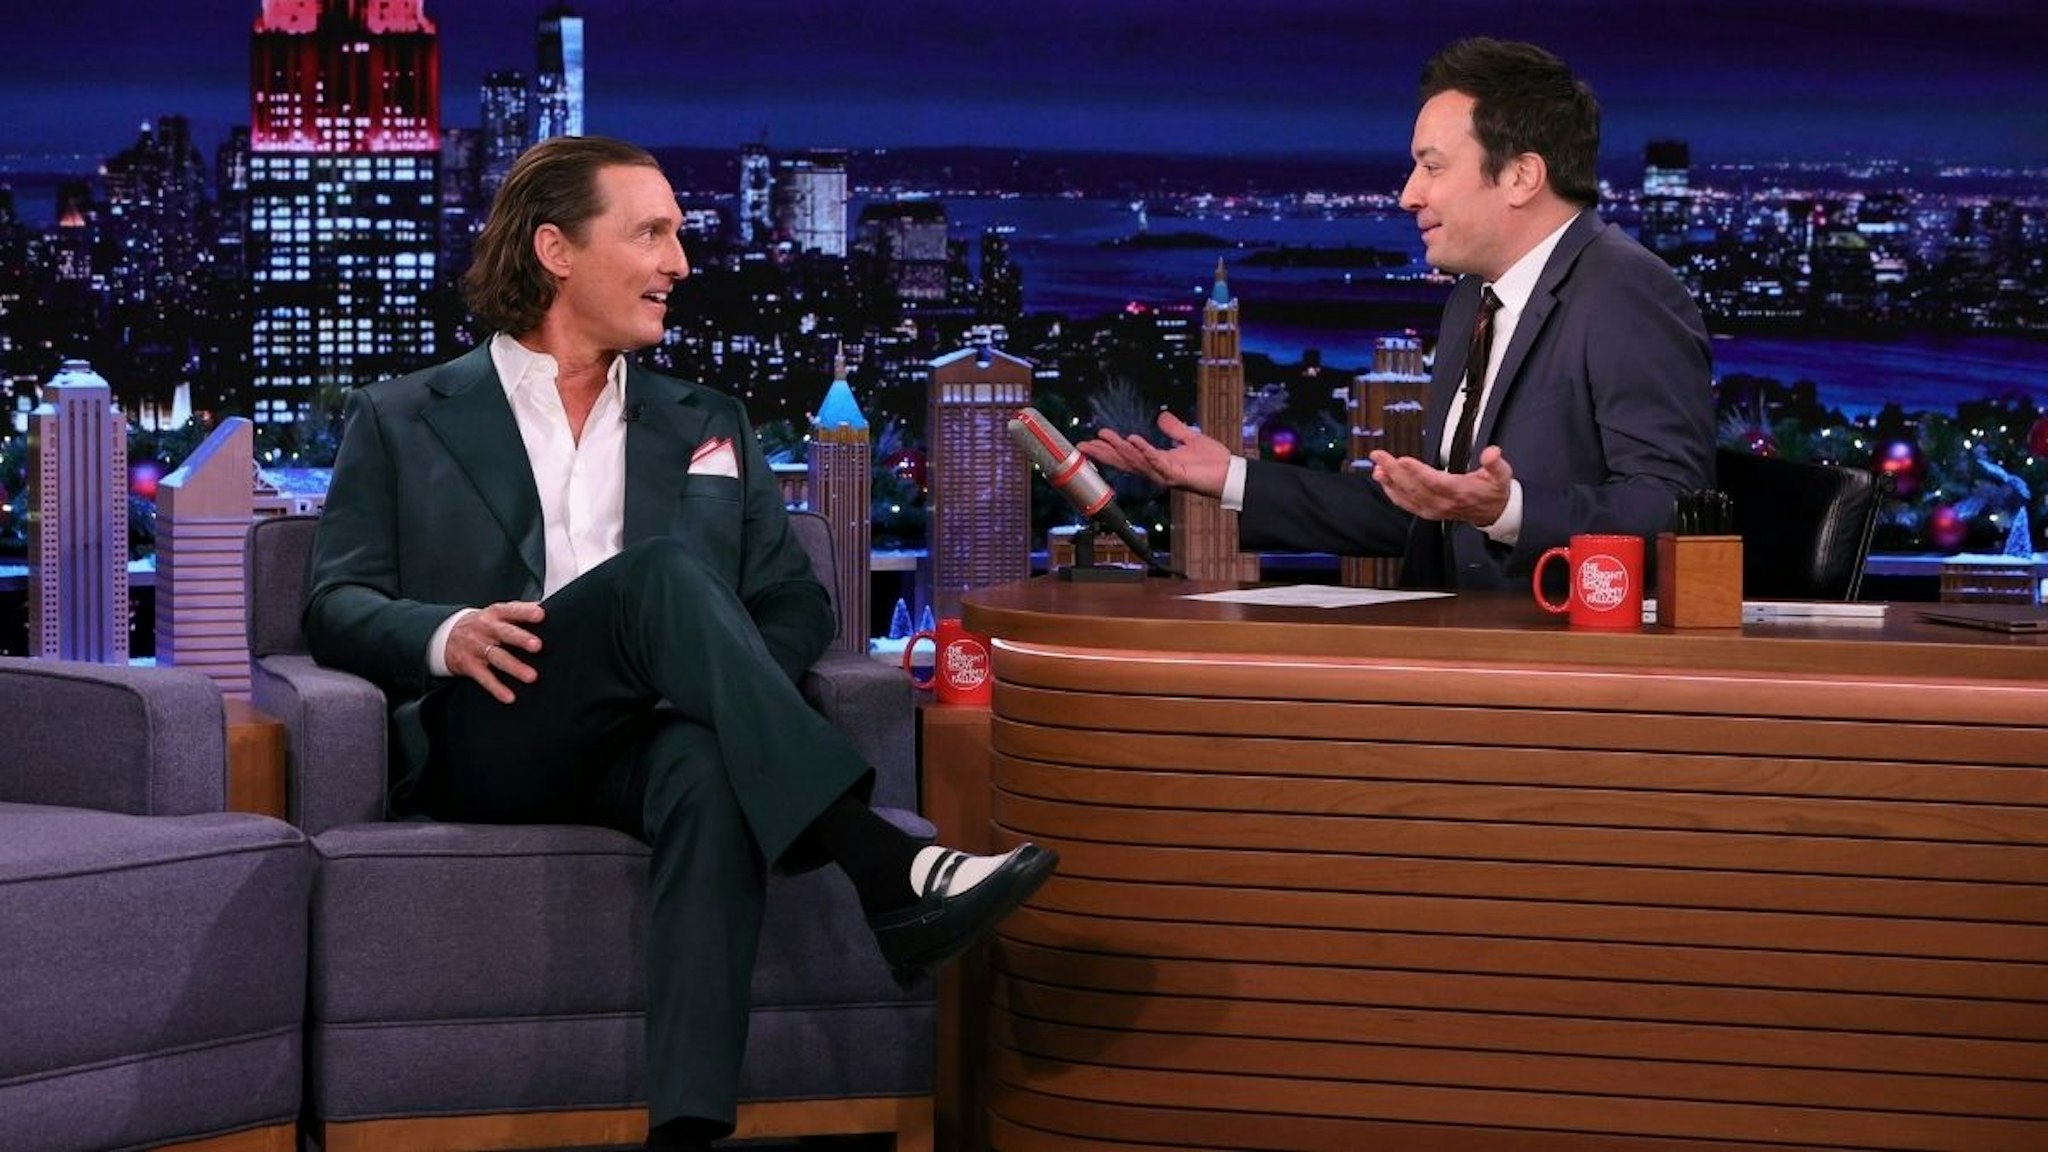 Pictured: (l-r) Actor Matthew McConaughey during an interview with host Jimmy Fallon on Tuesday, December 14, 2021.